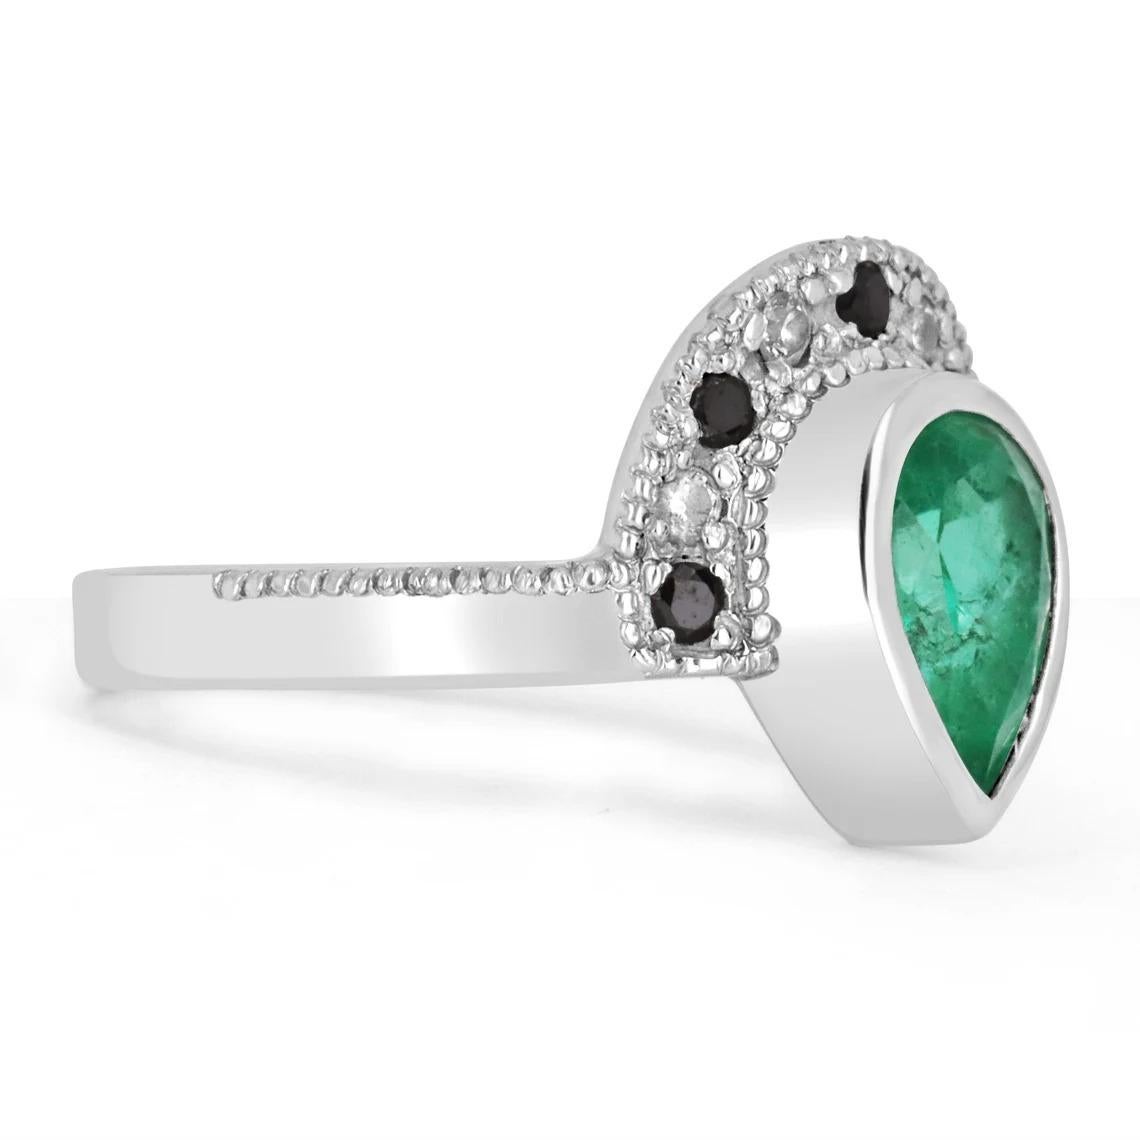 The perfect, tiara emerald & diamond statement ring. This gorgeous piece is sure to get all the right attention! The 1.54-carat pear-shaped emerald is carefully bezel set in a 14K white gold setting. Minor Jardins exist in the emerald as it is